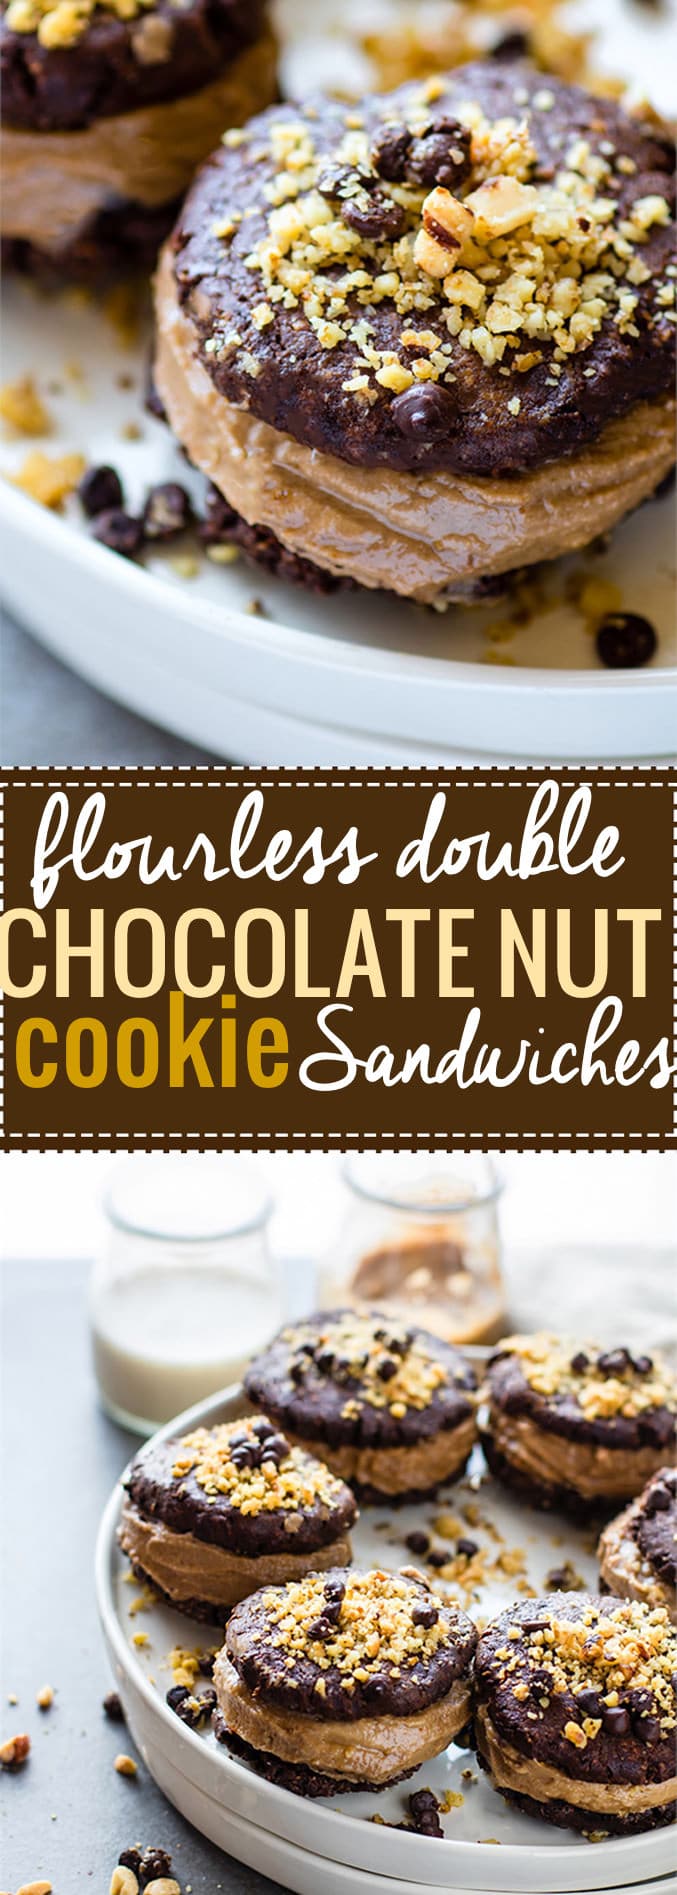 AMAZING Flourless Double Chocolate Nut Cookie Sandwiches! Healthy, easy to make, and Gluten Free and Paleo friendly! Dark chocolate, chocolate chips, and a nutty filling that will make your mouth water. @cottercrunch